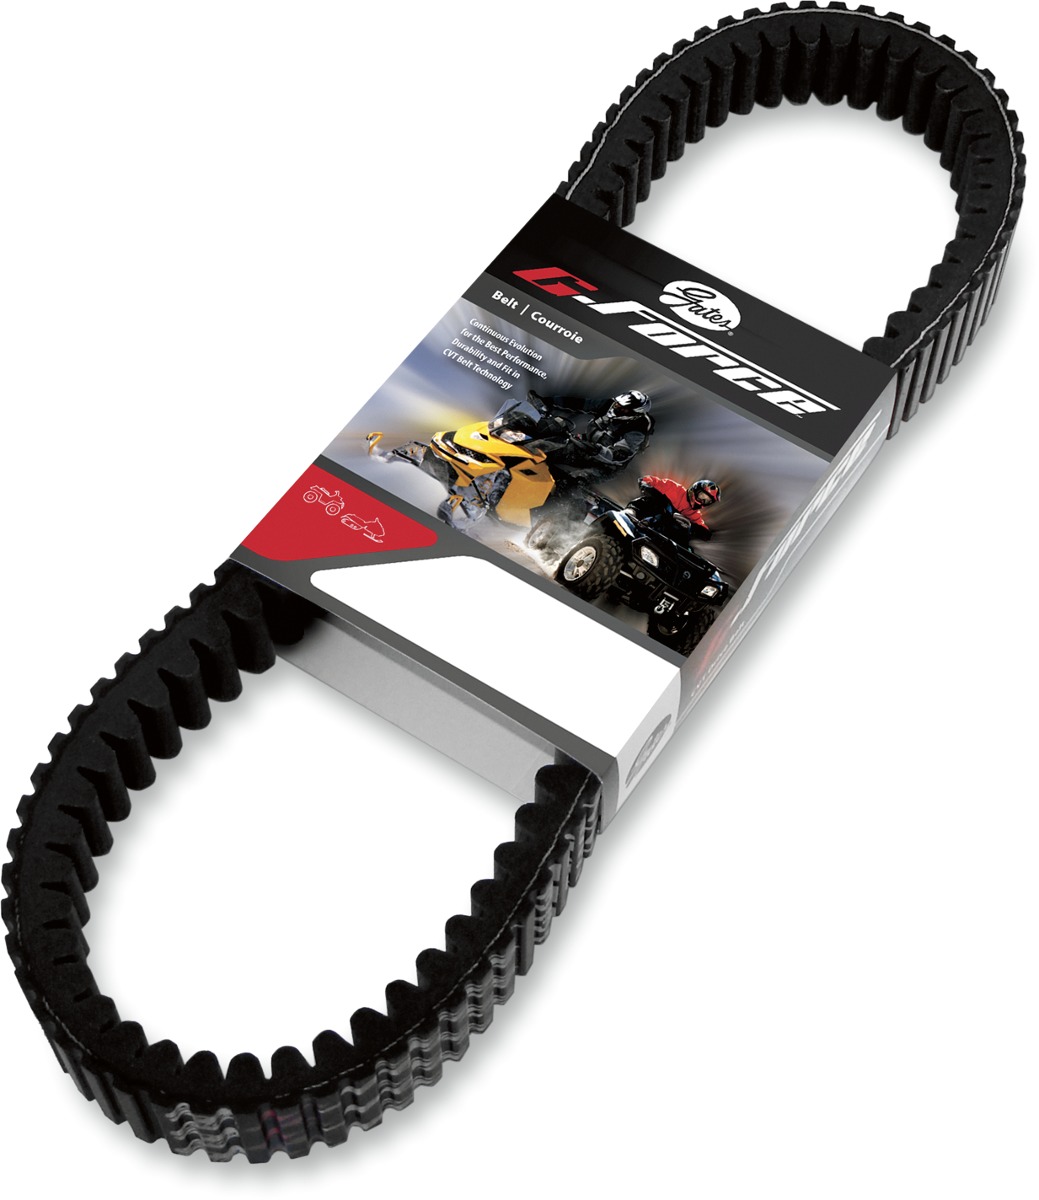 G-Force Top-Cog Drive Belt 1-1/2" - For 03-19 Can-Am Ski-Doo - Click Image to Close